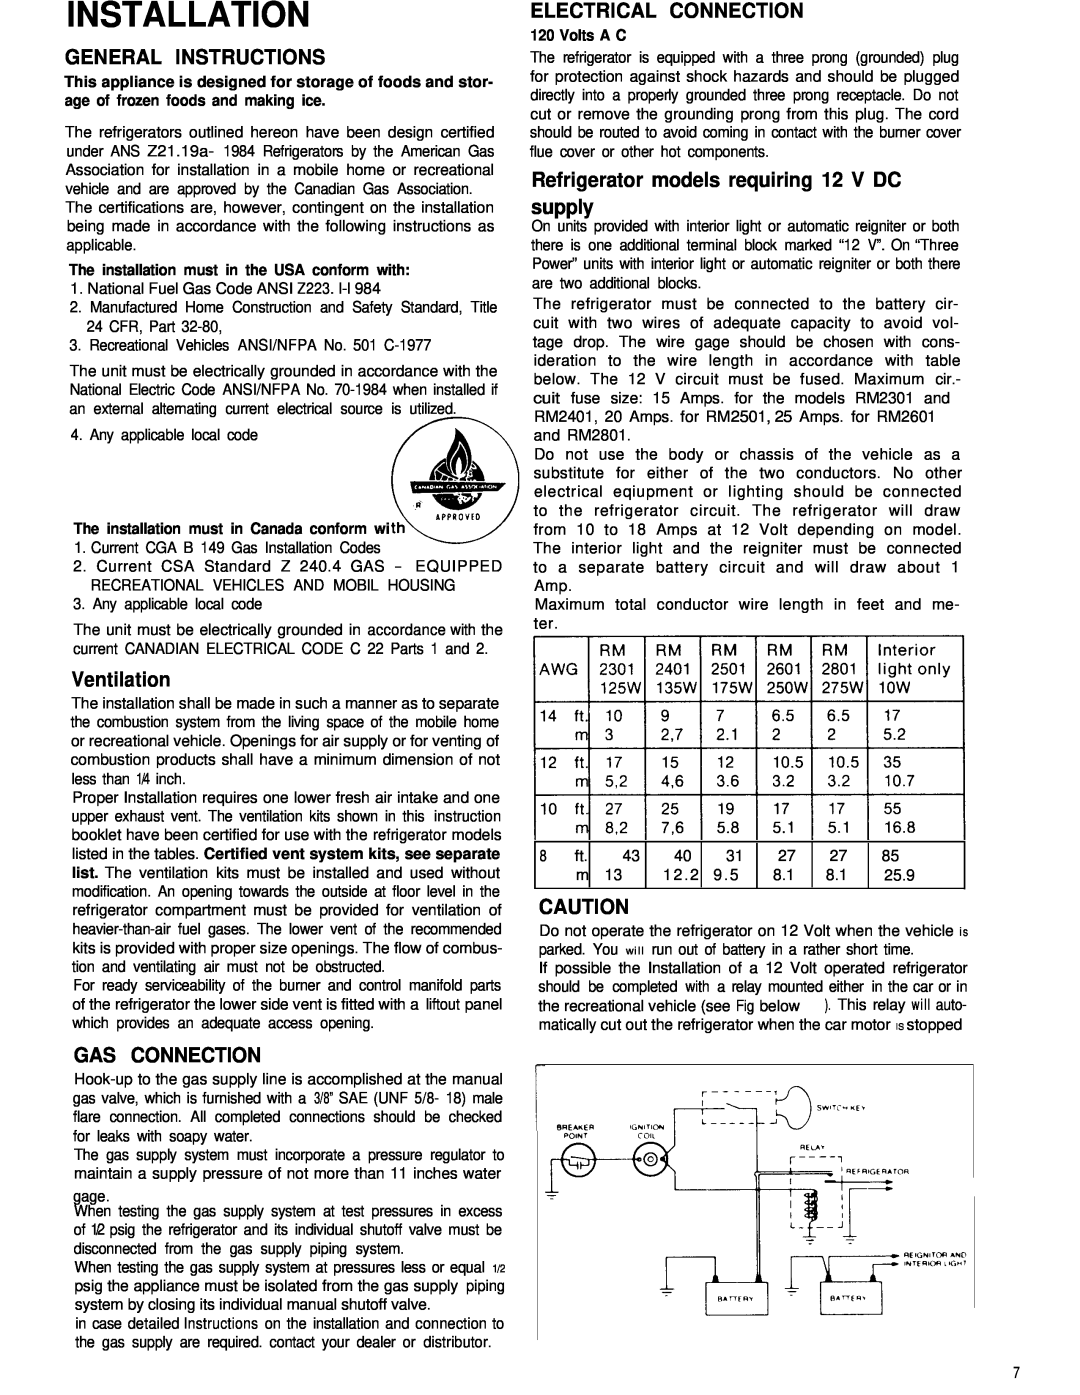 Dometic RM2801 General Instructions, Ventilation, Electrical Connection, Refrigerator models requiring 12 V DC supply 